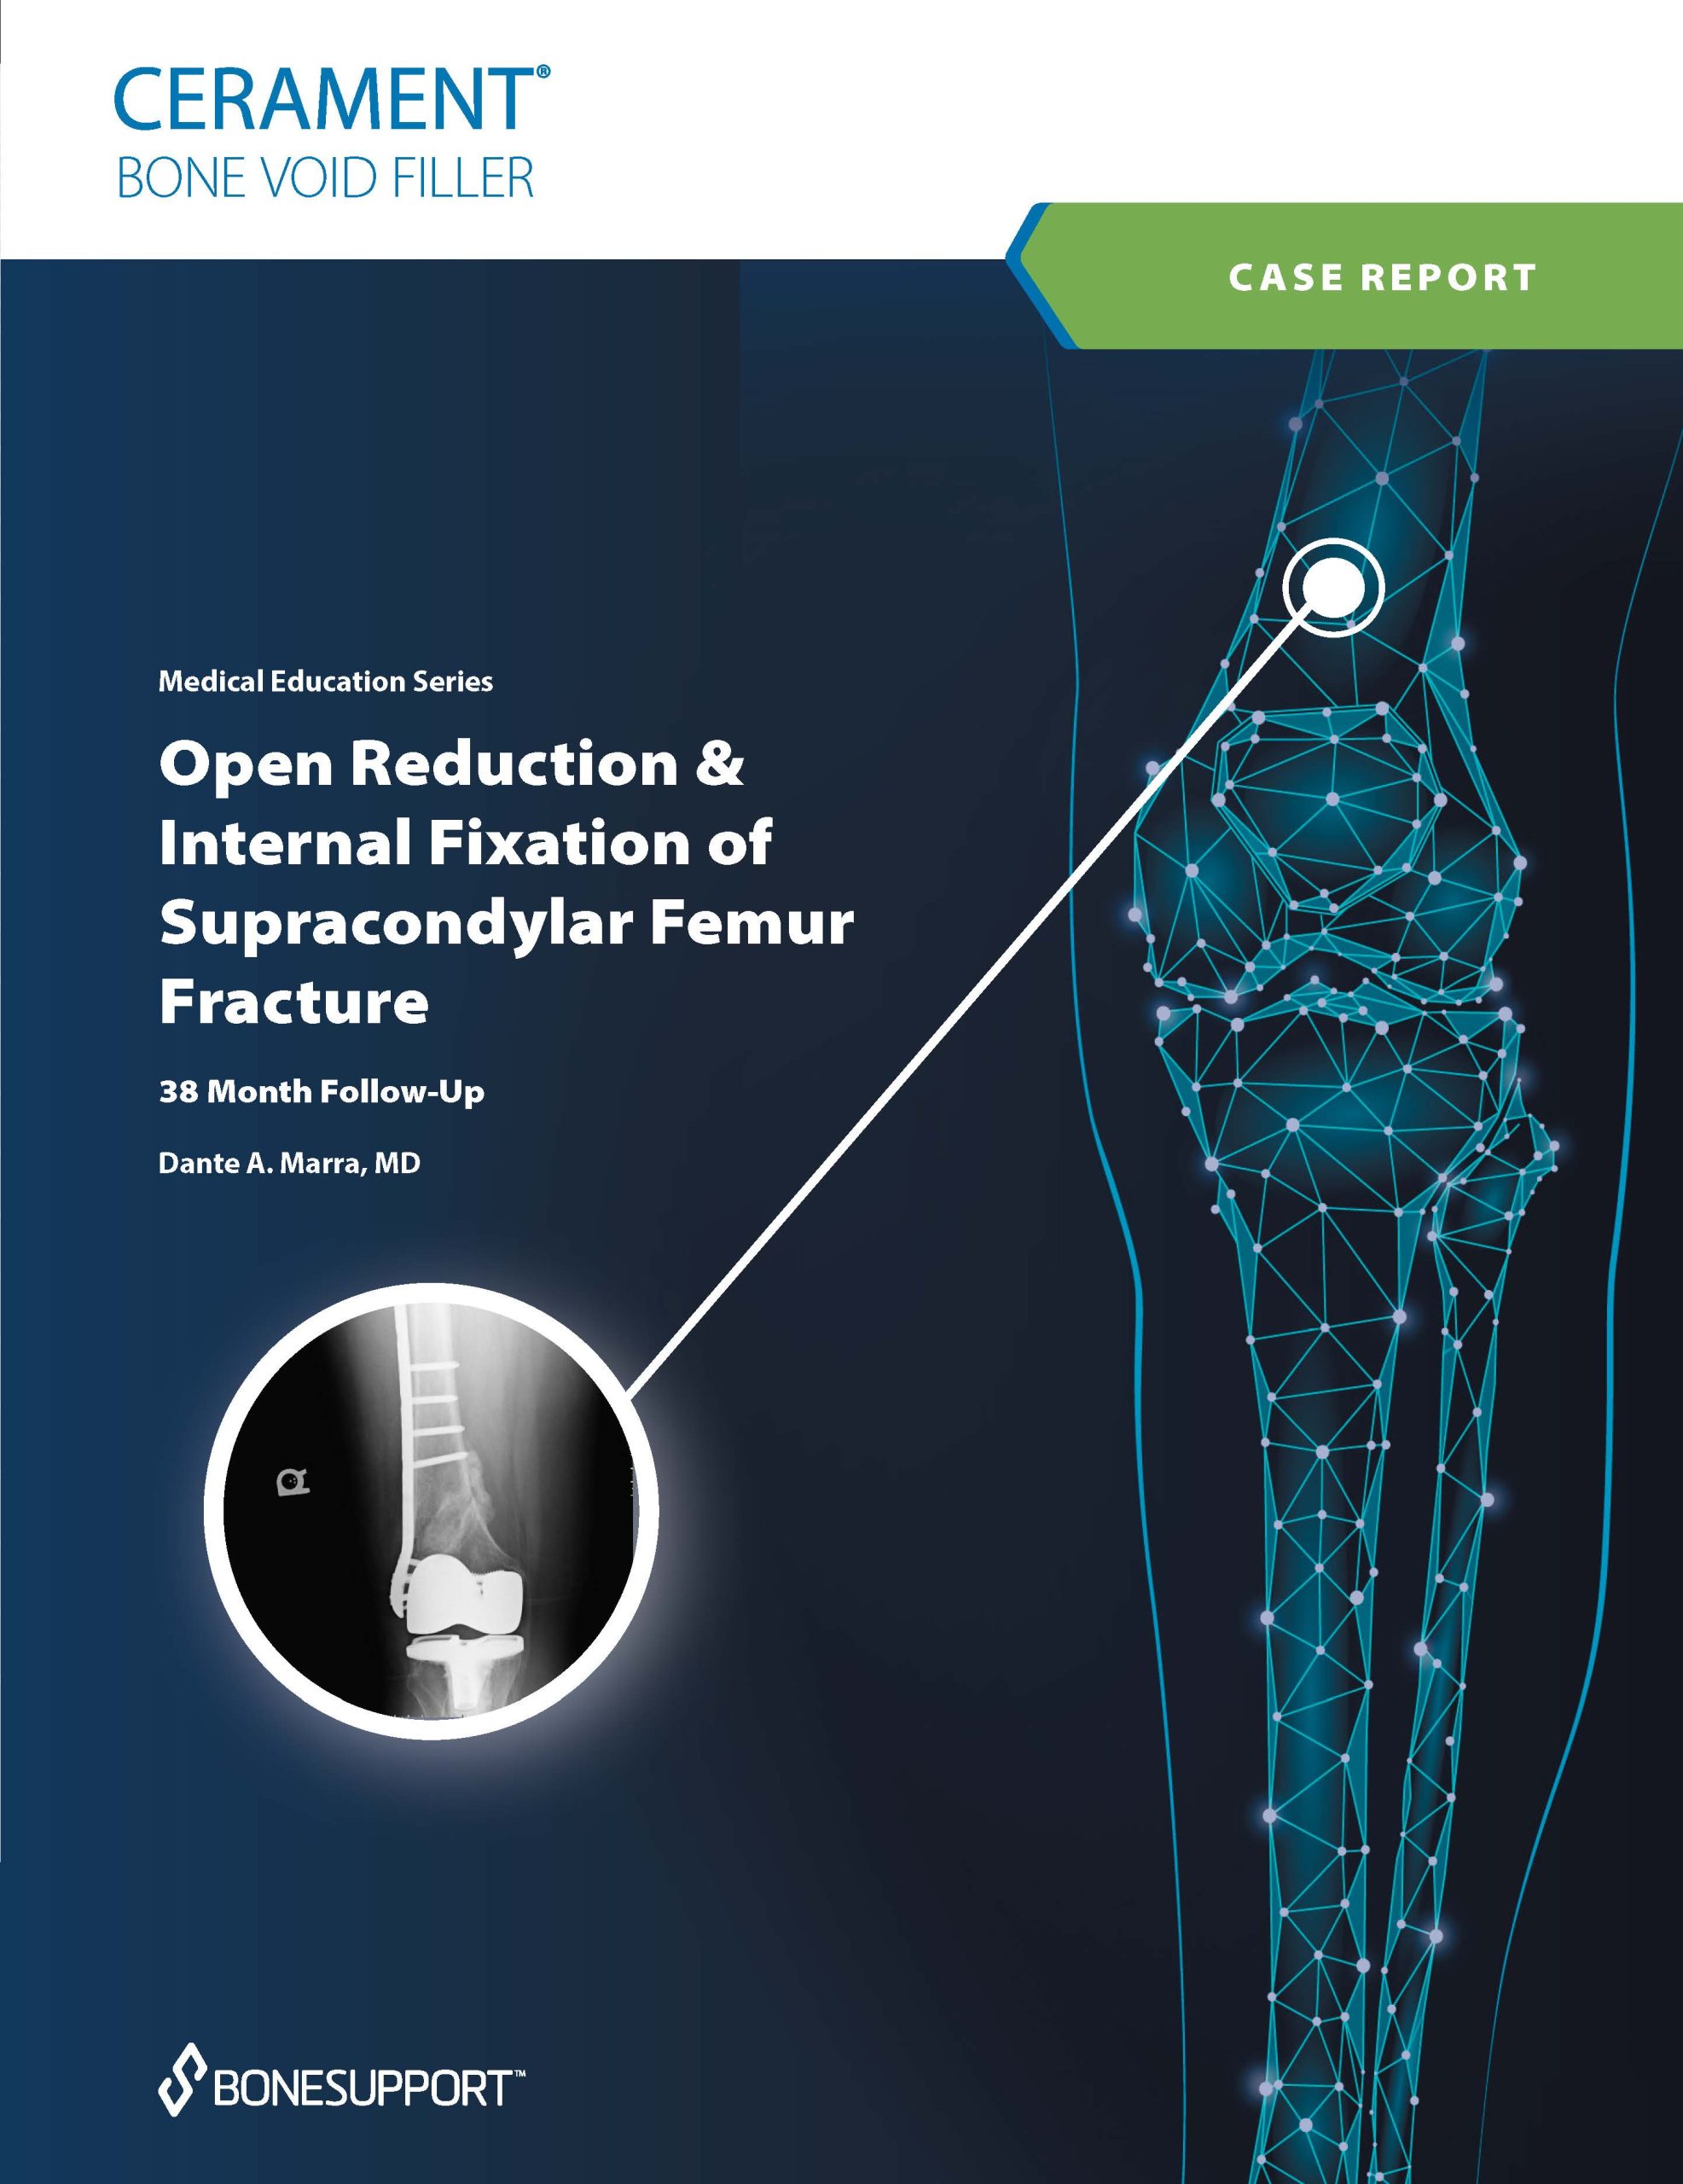 Open Reduction and Internal Fixation of a Supracondylar Femur Fracture with CERAMENT®|BONE VOID FILLER